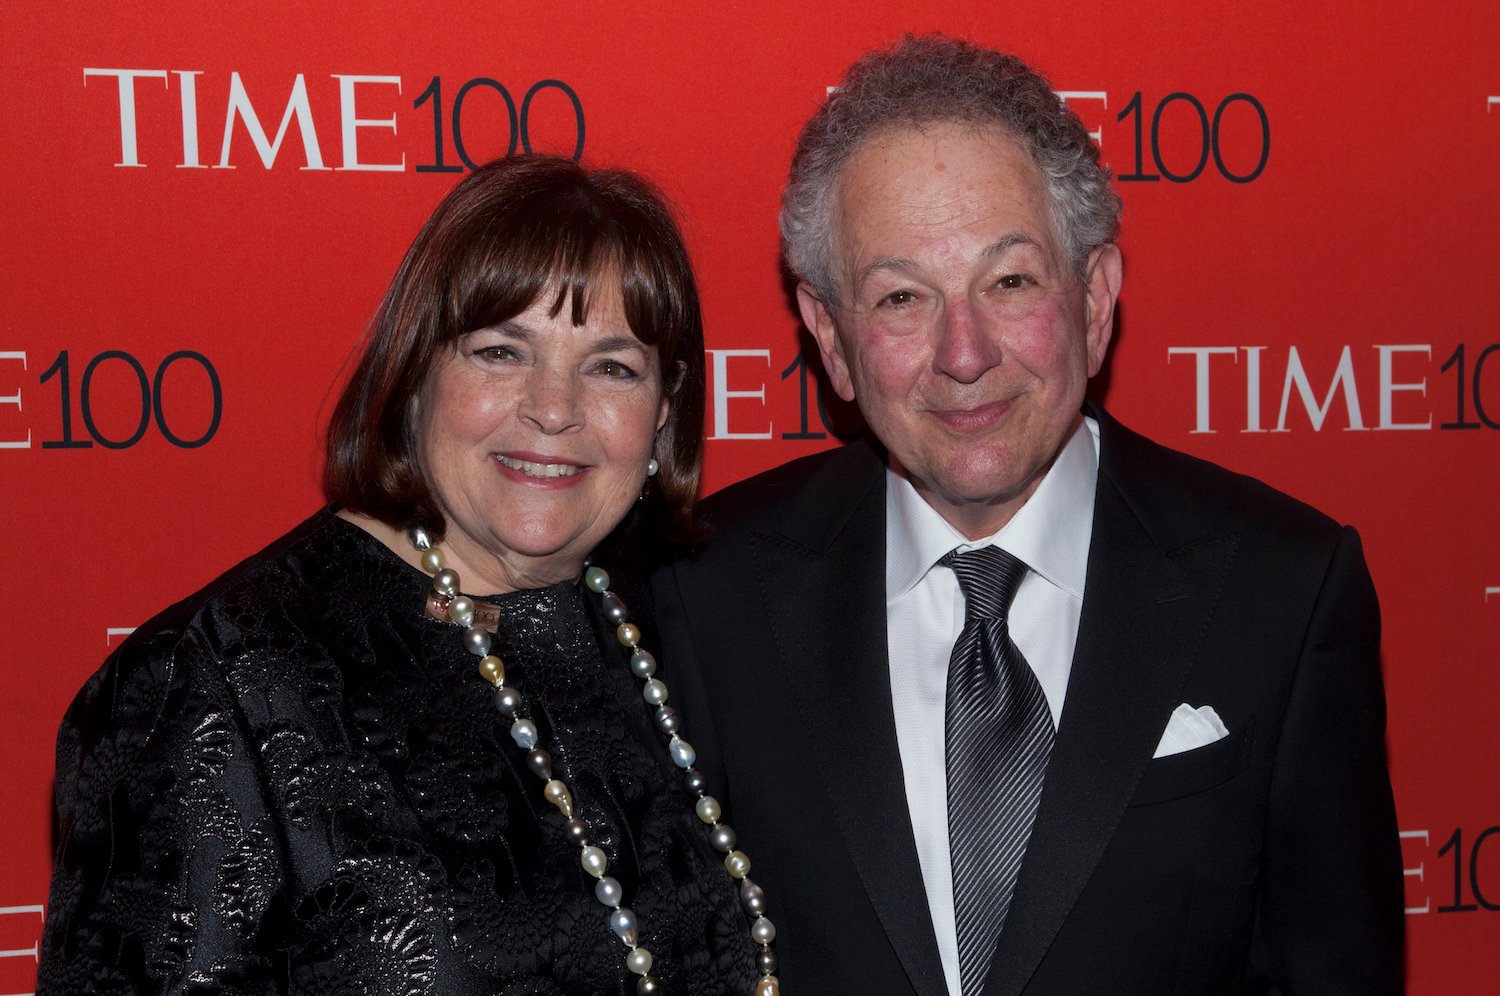 Ina Garten attends the 'TIME 100 Gala, TIME's 100 Most Influential People In The World'